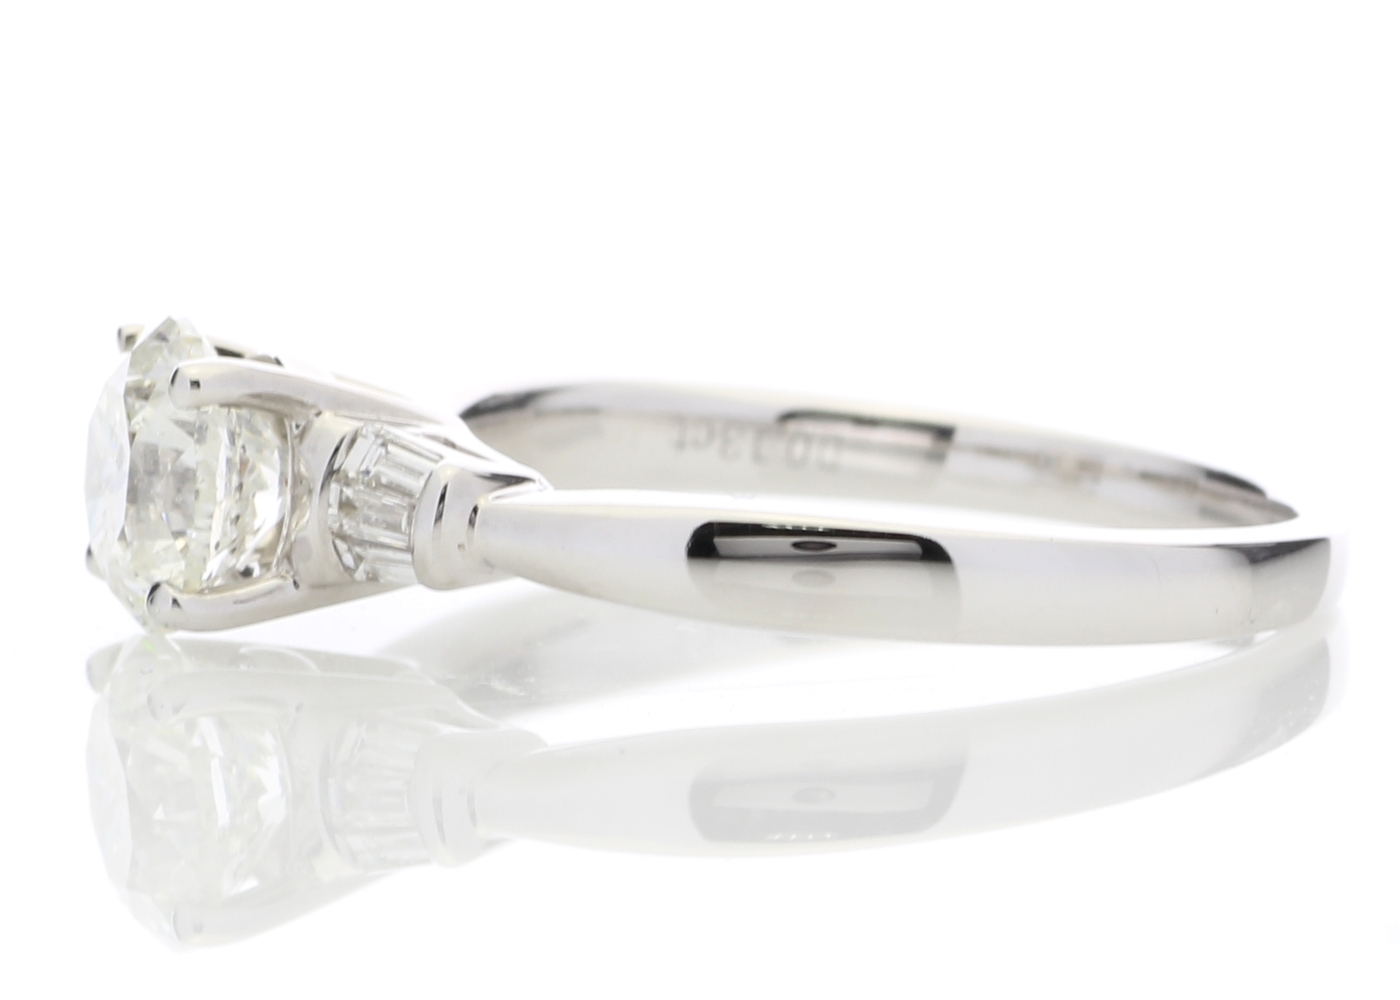 18ct White Gold Diamond Ring With Baguette 1.15 Carats - Image 3 of 5